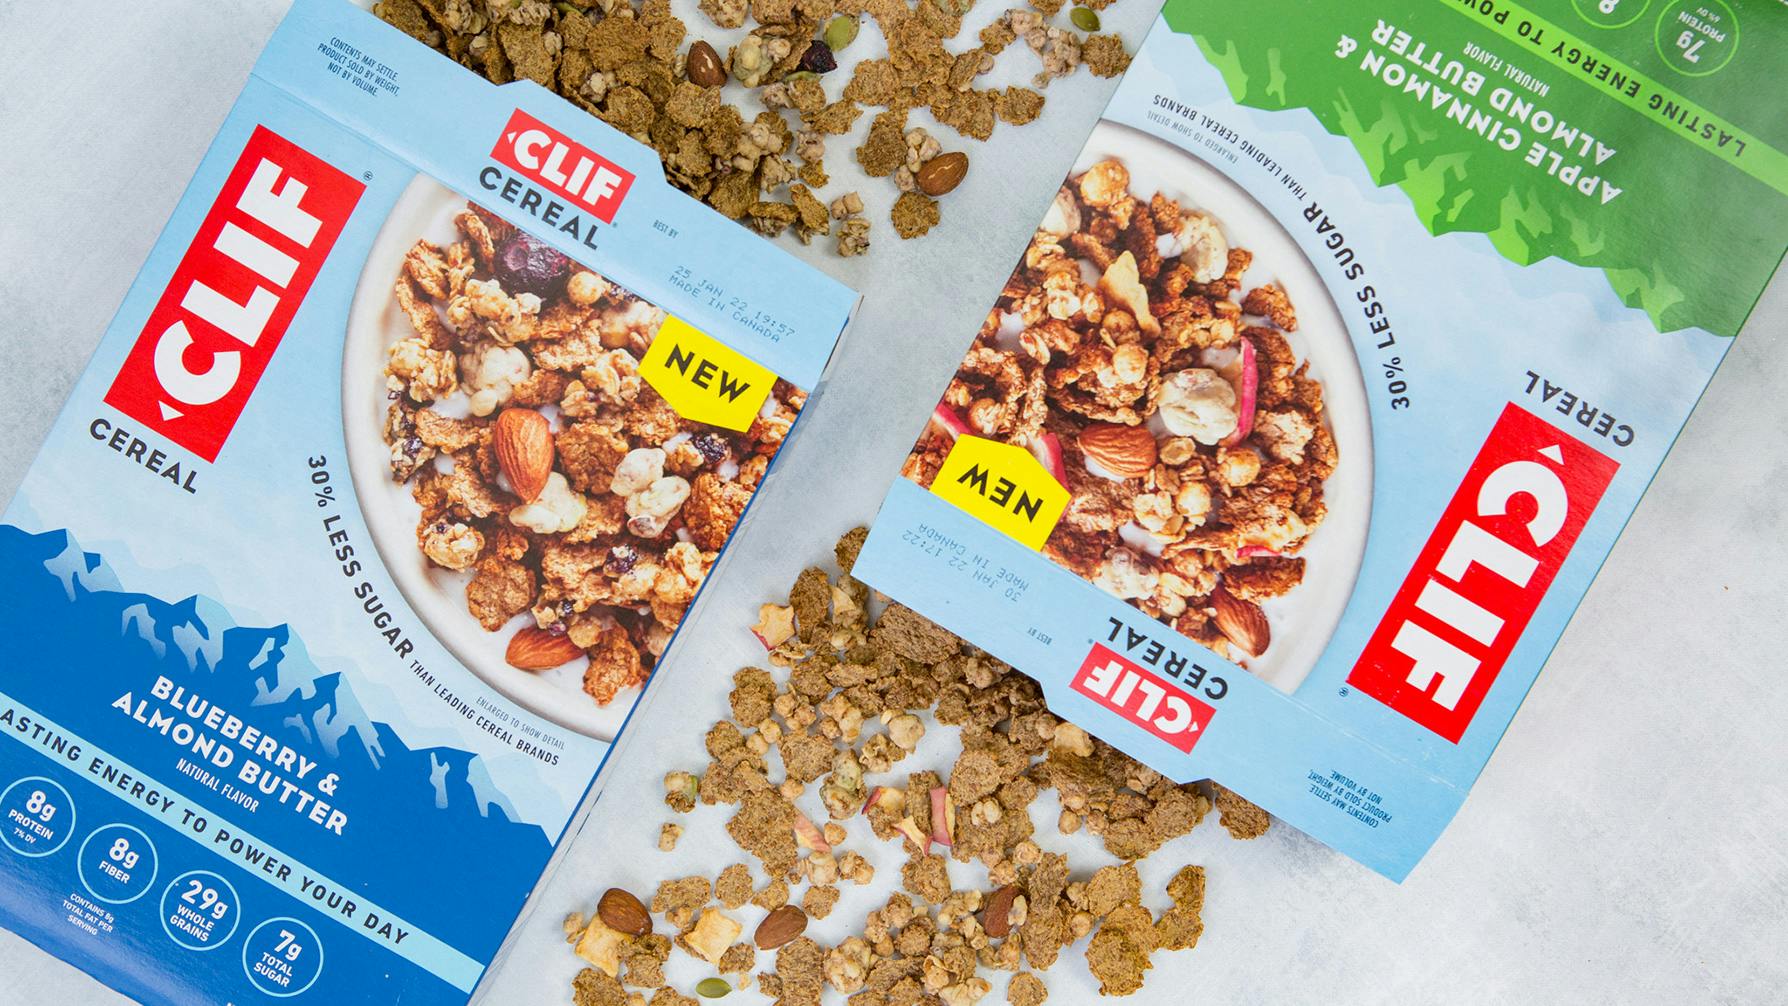 CLIF Cereal Blueberry and Almond Butter and Apple Cinnamon and Almond Butter boxes